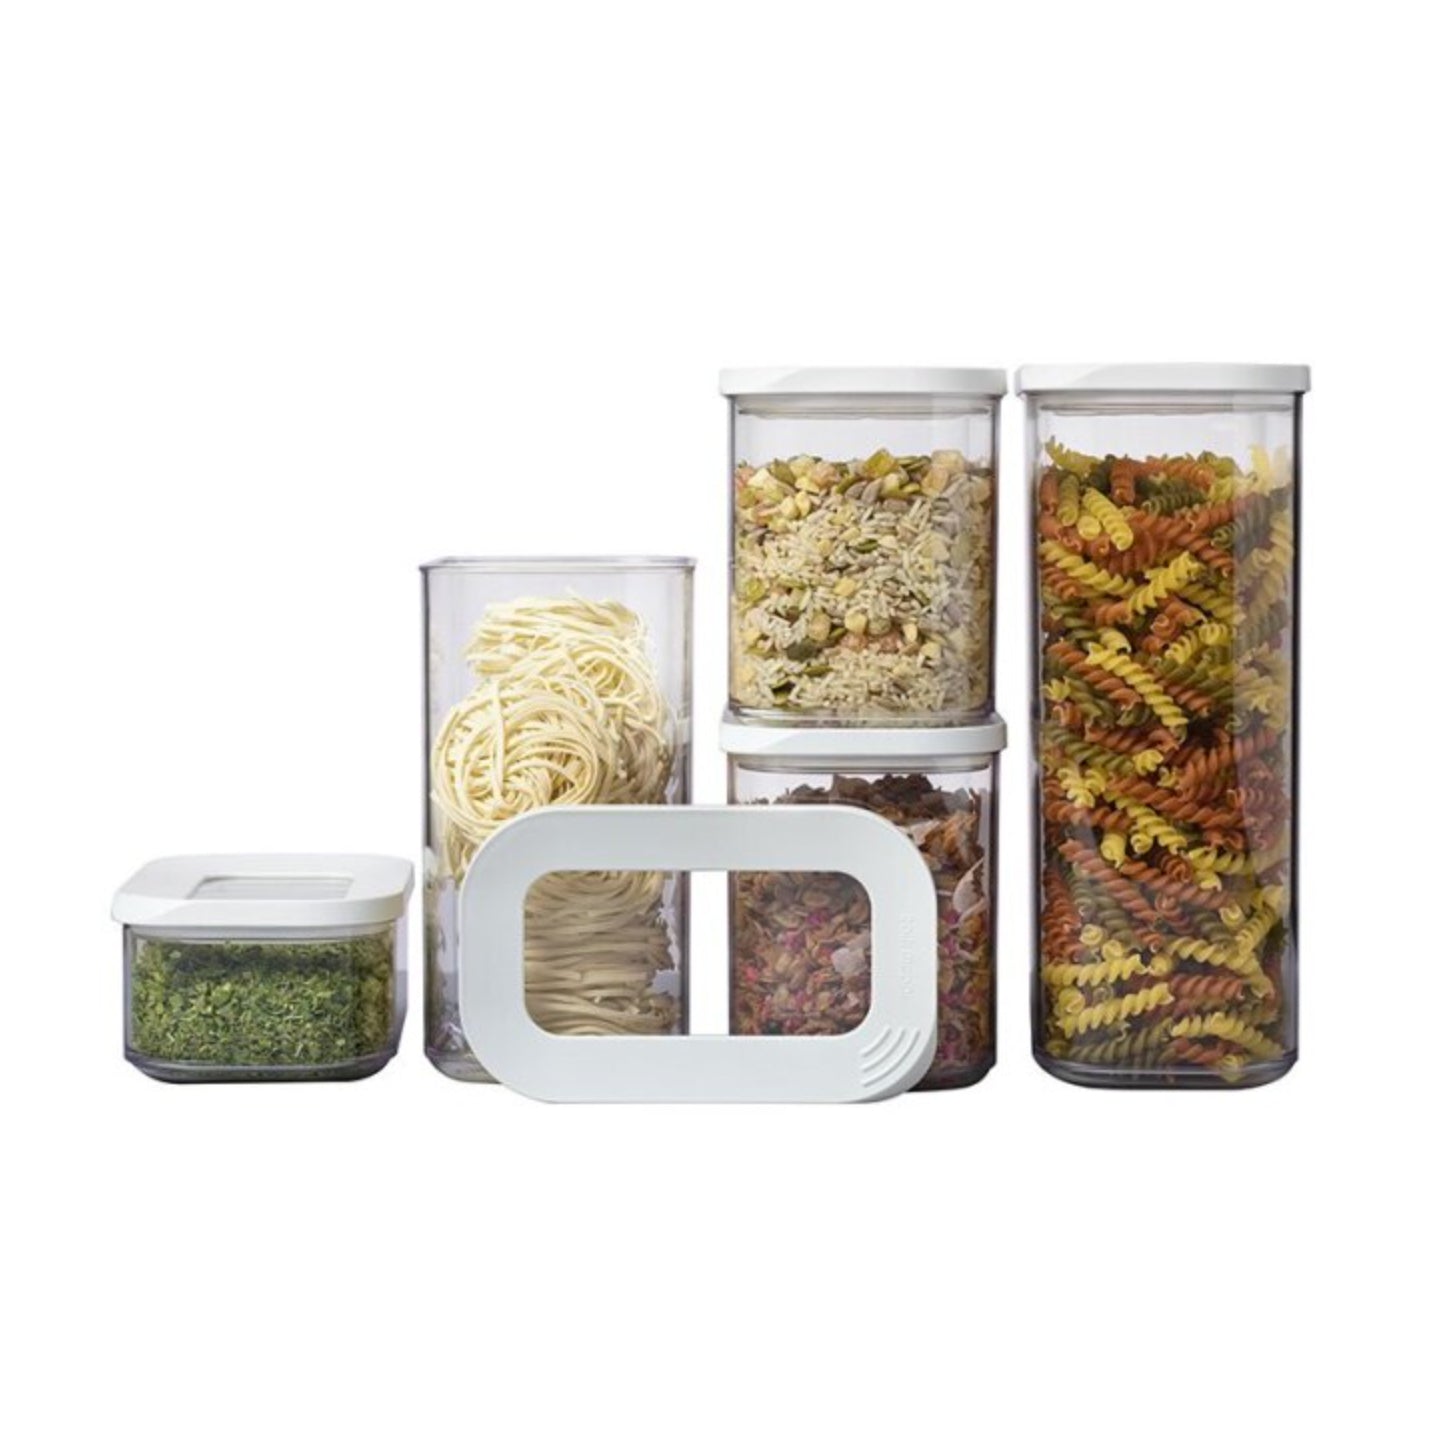 Mepal Modula Storage Containers / Set of 5 / White